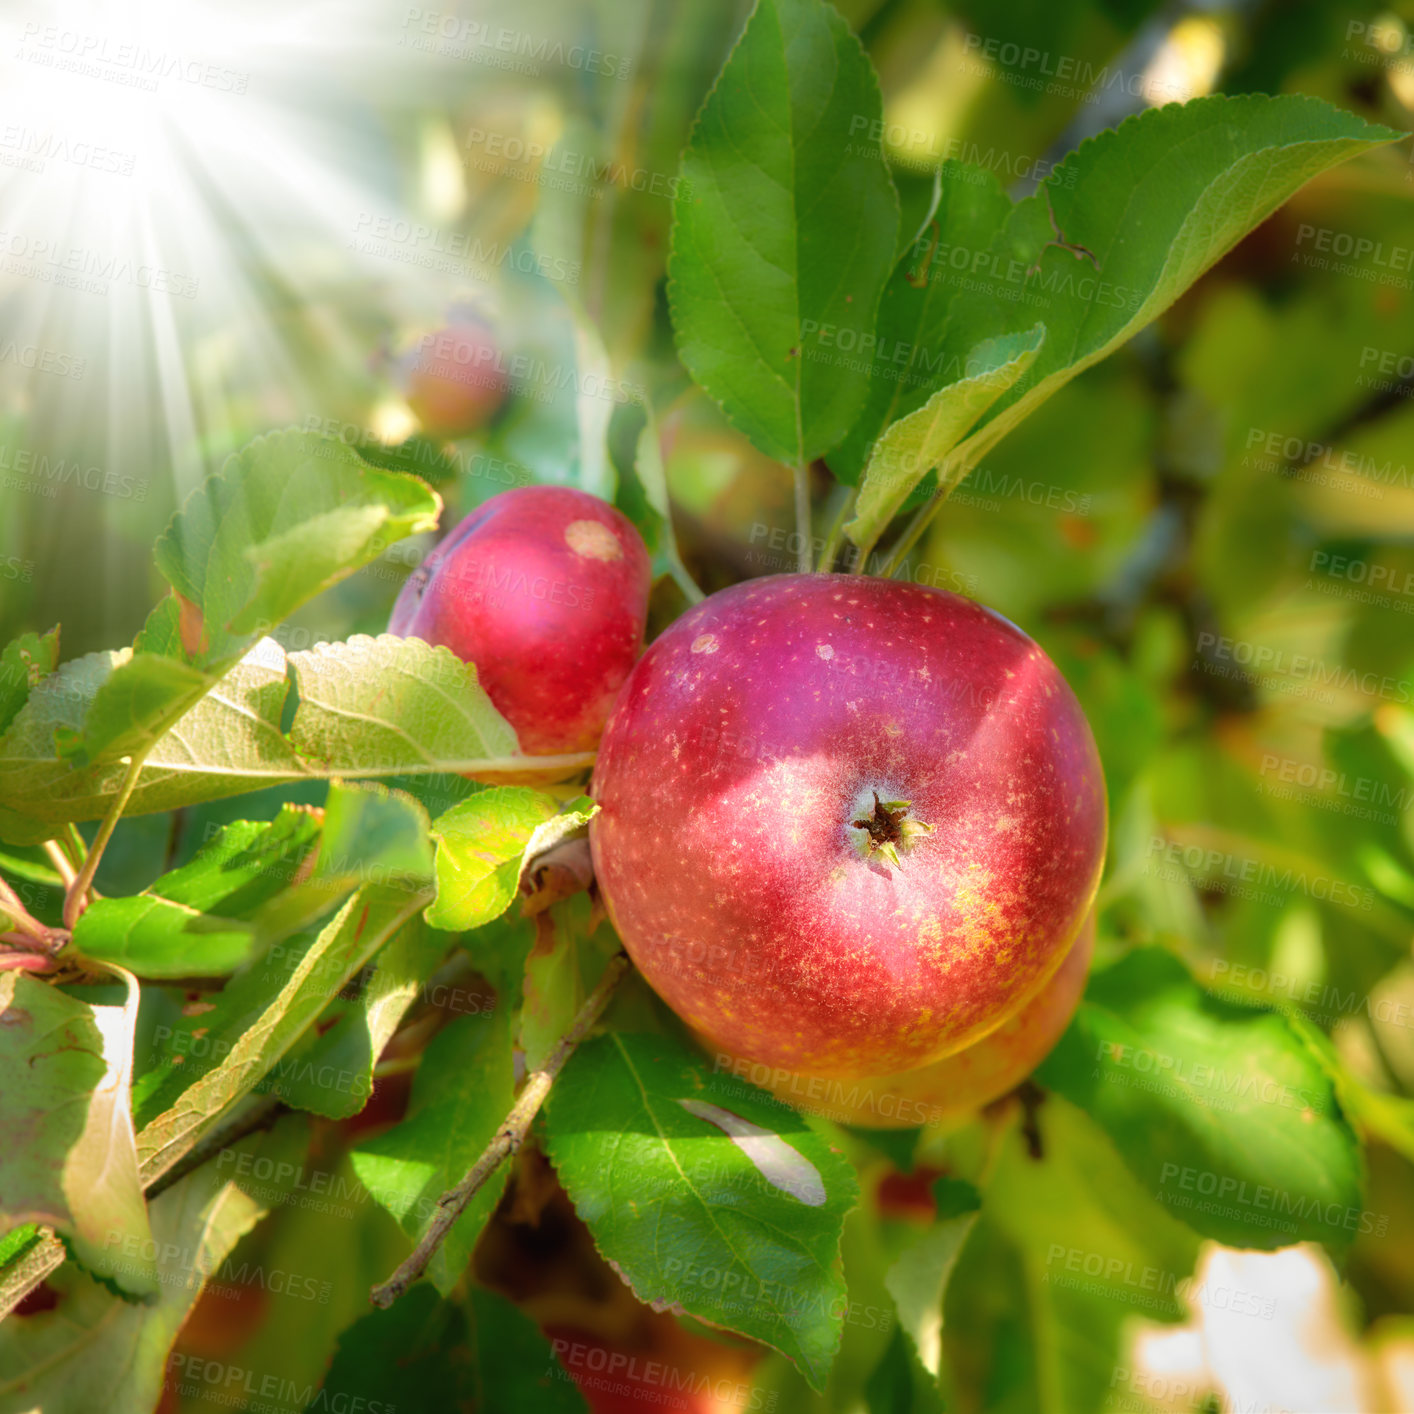 Buy stock photo Bright and ripe red apples growing on a farm in a green fruit tree on a sunny day. Organic crops ready for harvest during the autumn season outdoors in a garden with sunlight shining through